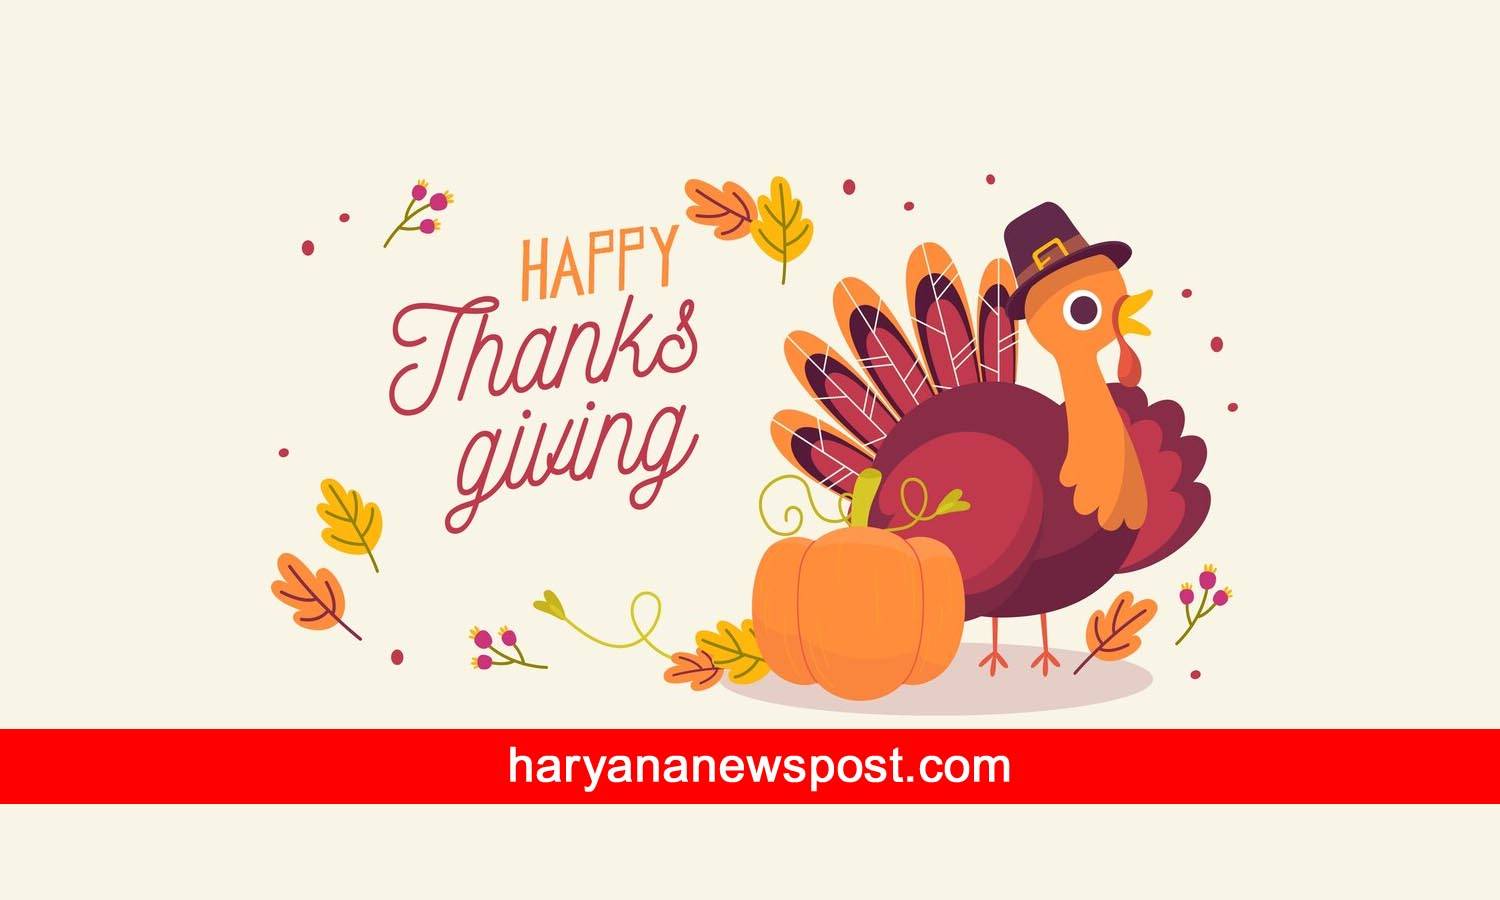 Funny Thanksgiving Wishes, Funny Thanksgiving Messages, Quotes, Jokes